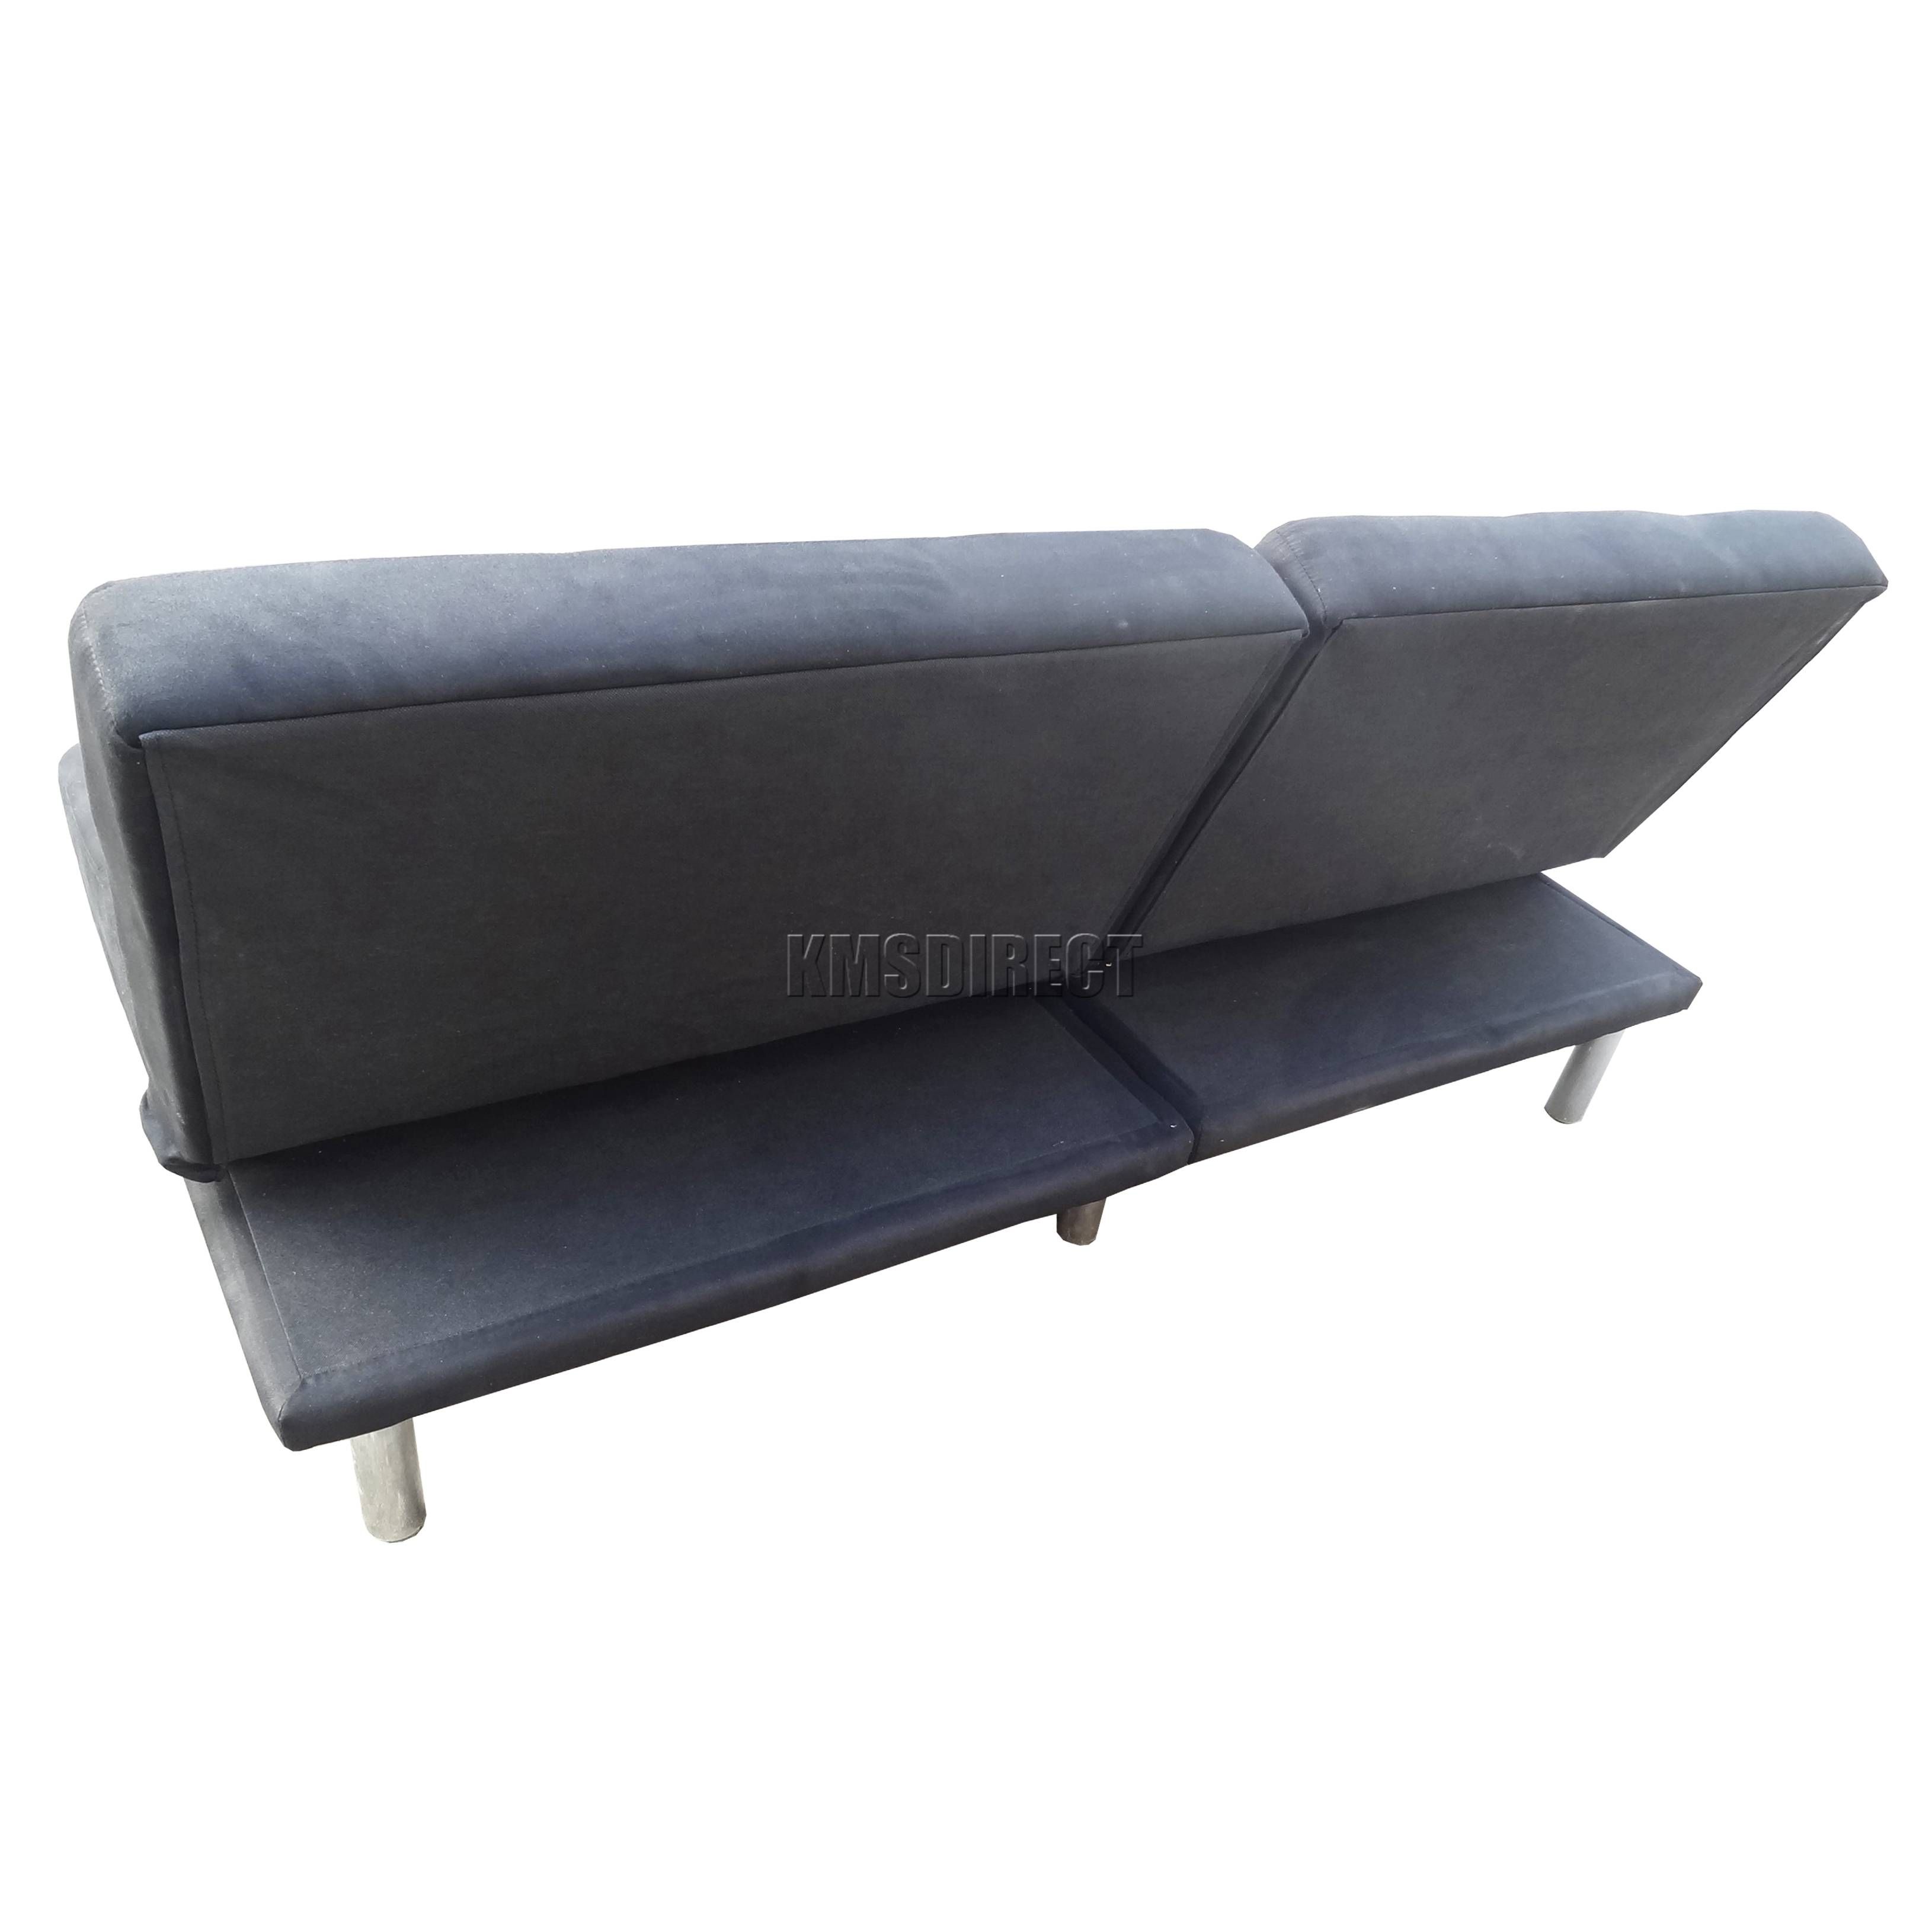 Foxhunter Fabric Faux Suede Sofa Bed Recliner 2 Seater Modern Regarding Faux Suede Sofa Bed (View 7 of 25)